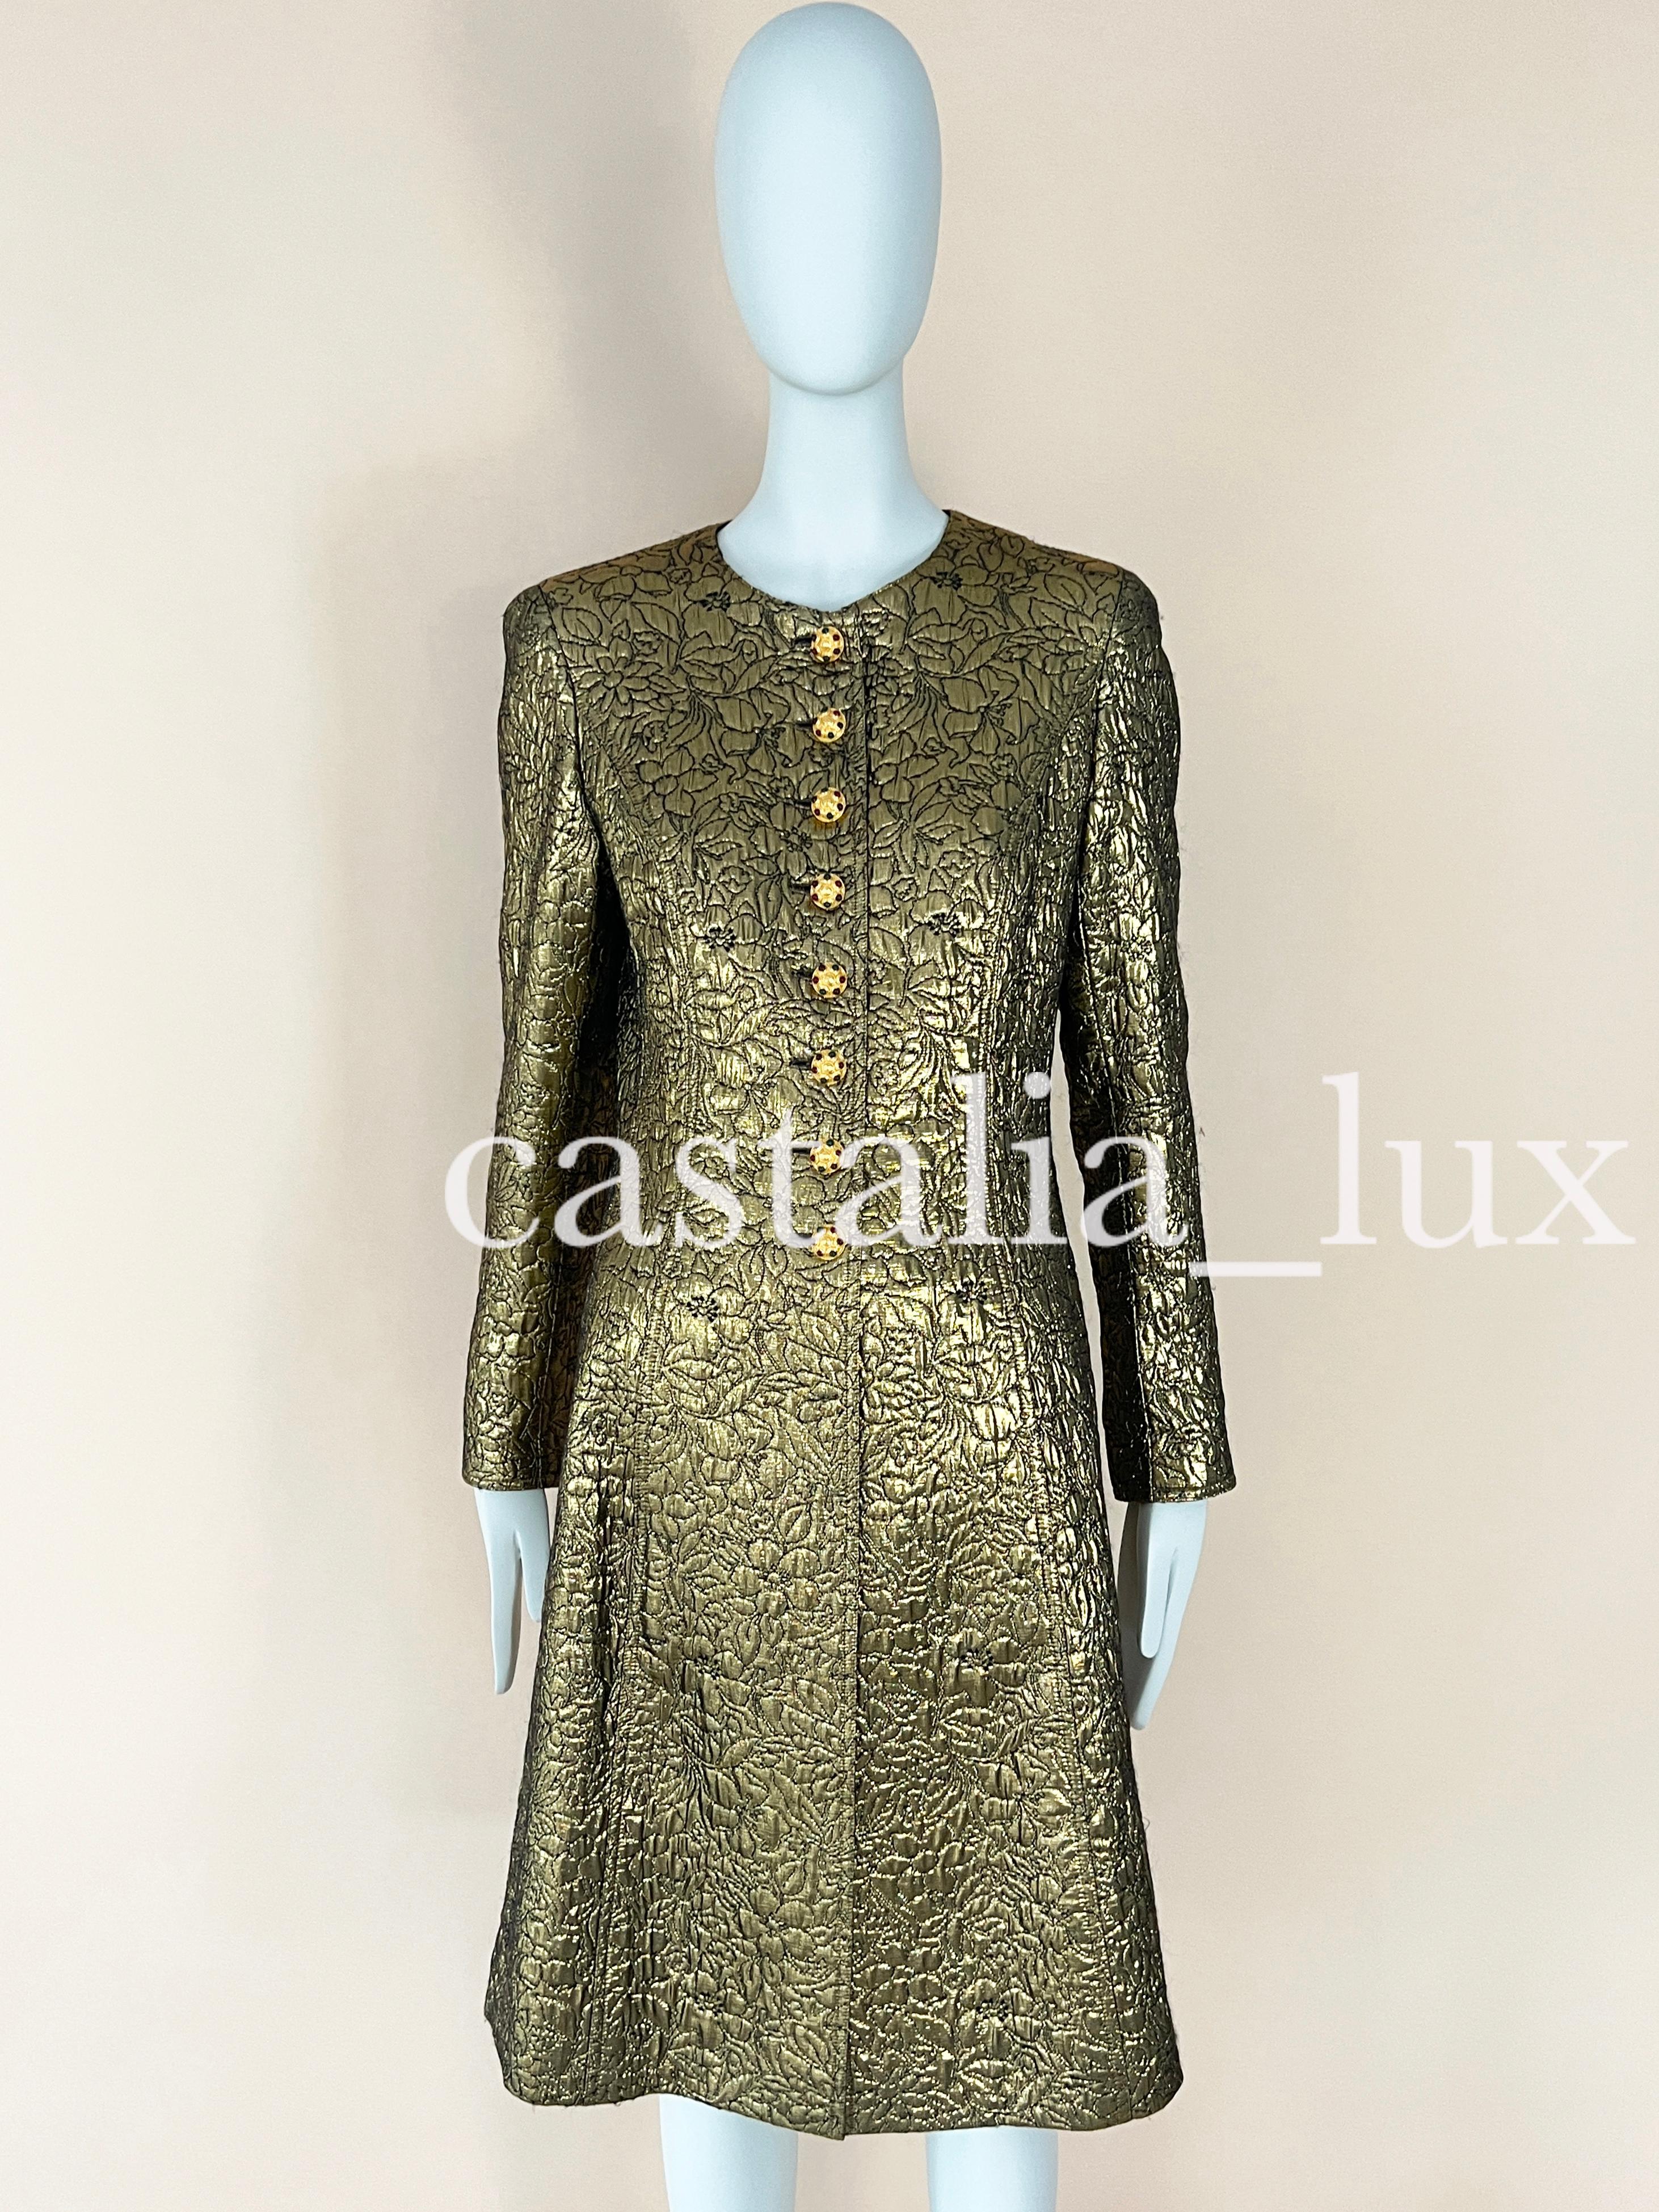 Chanel Museum Worth Jewel Buttons Brocade Jacket  For Sale 6